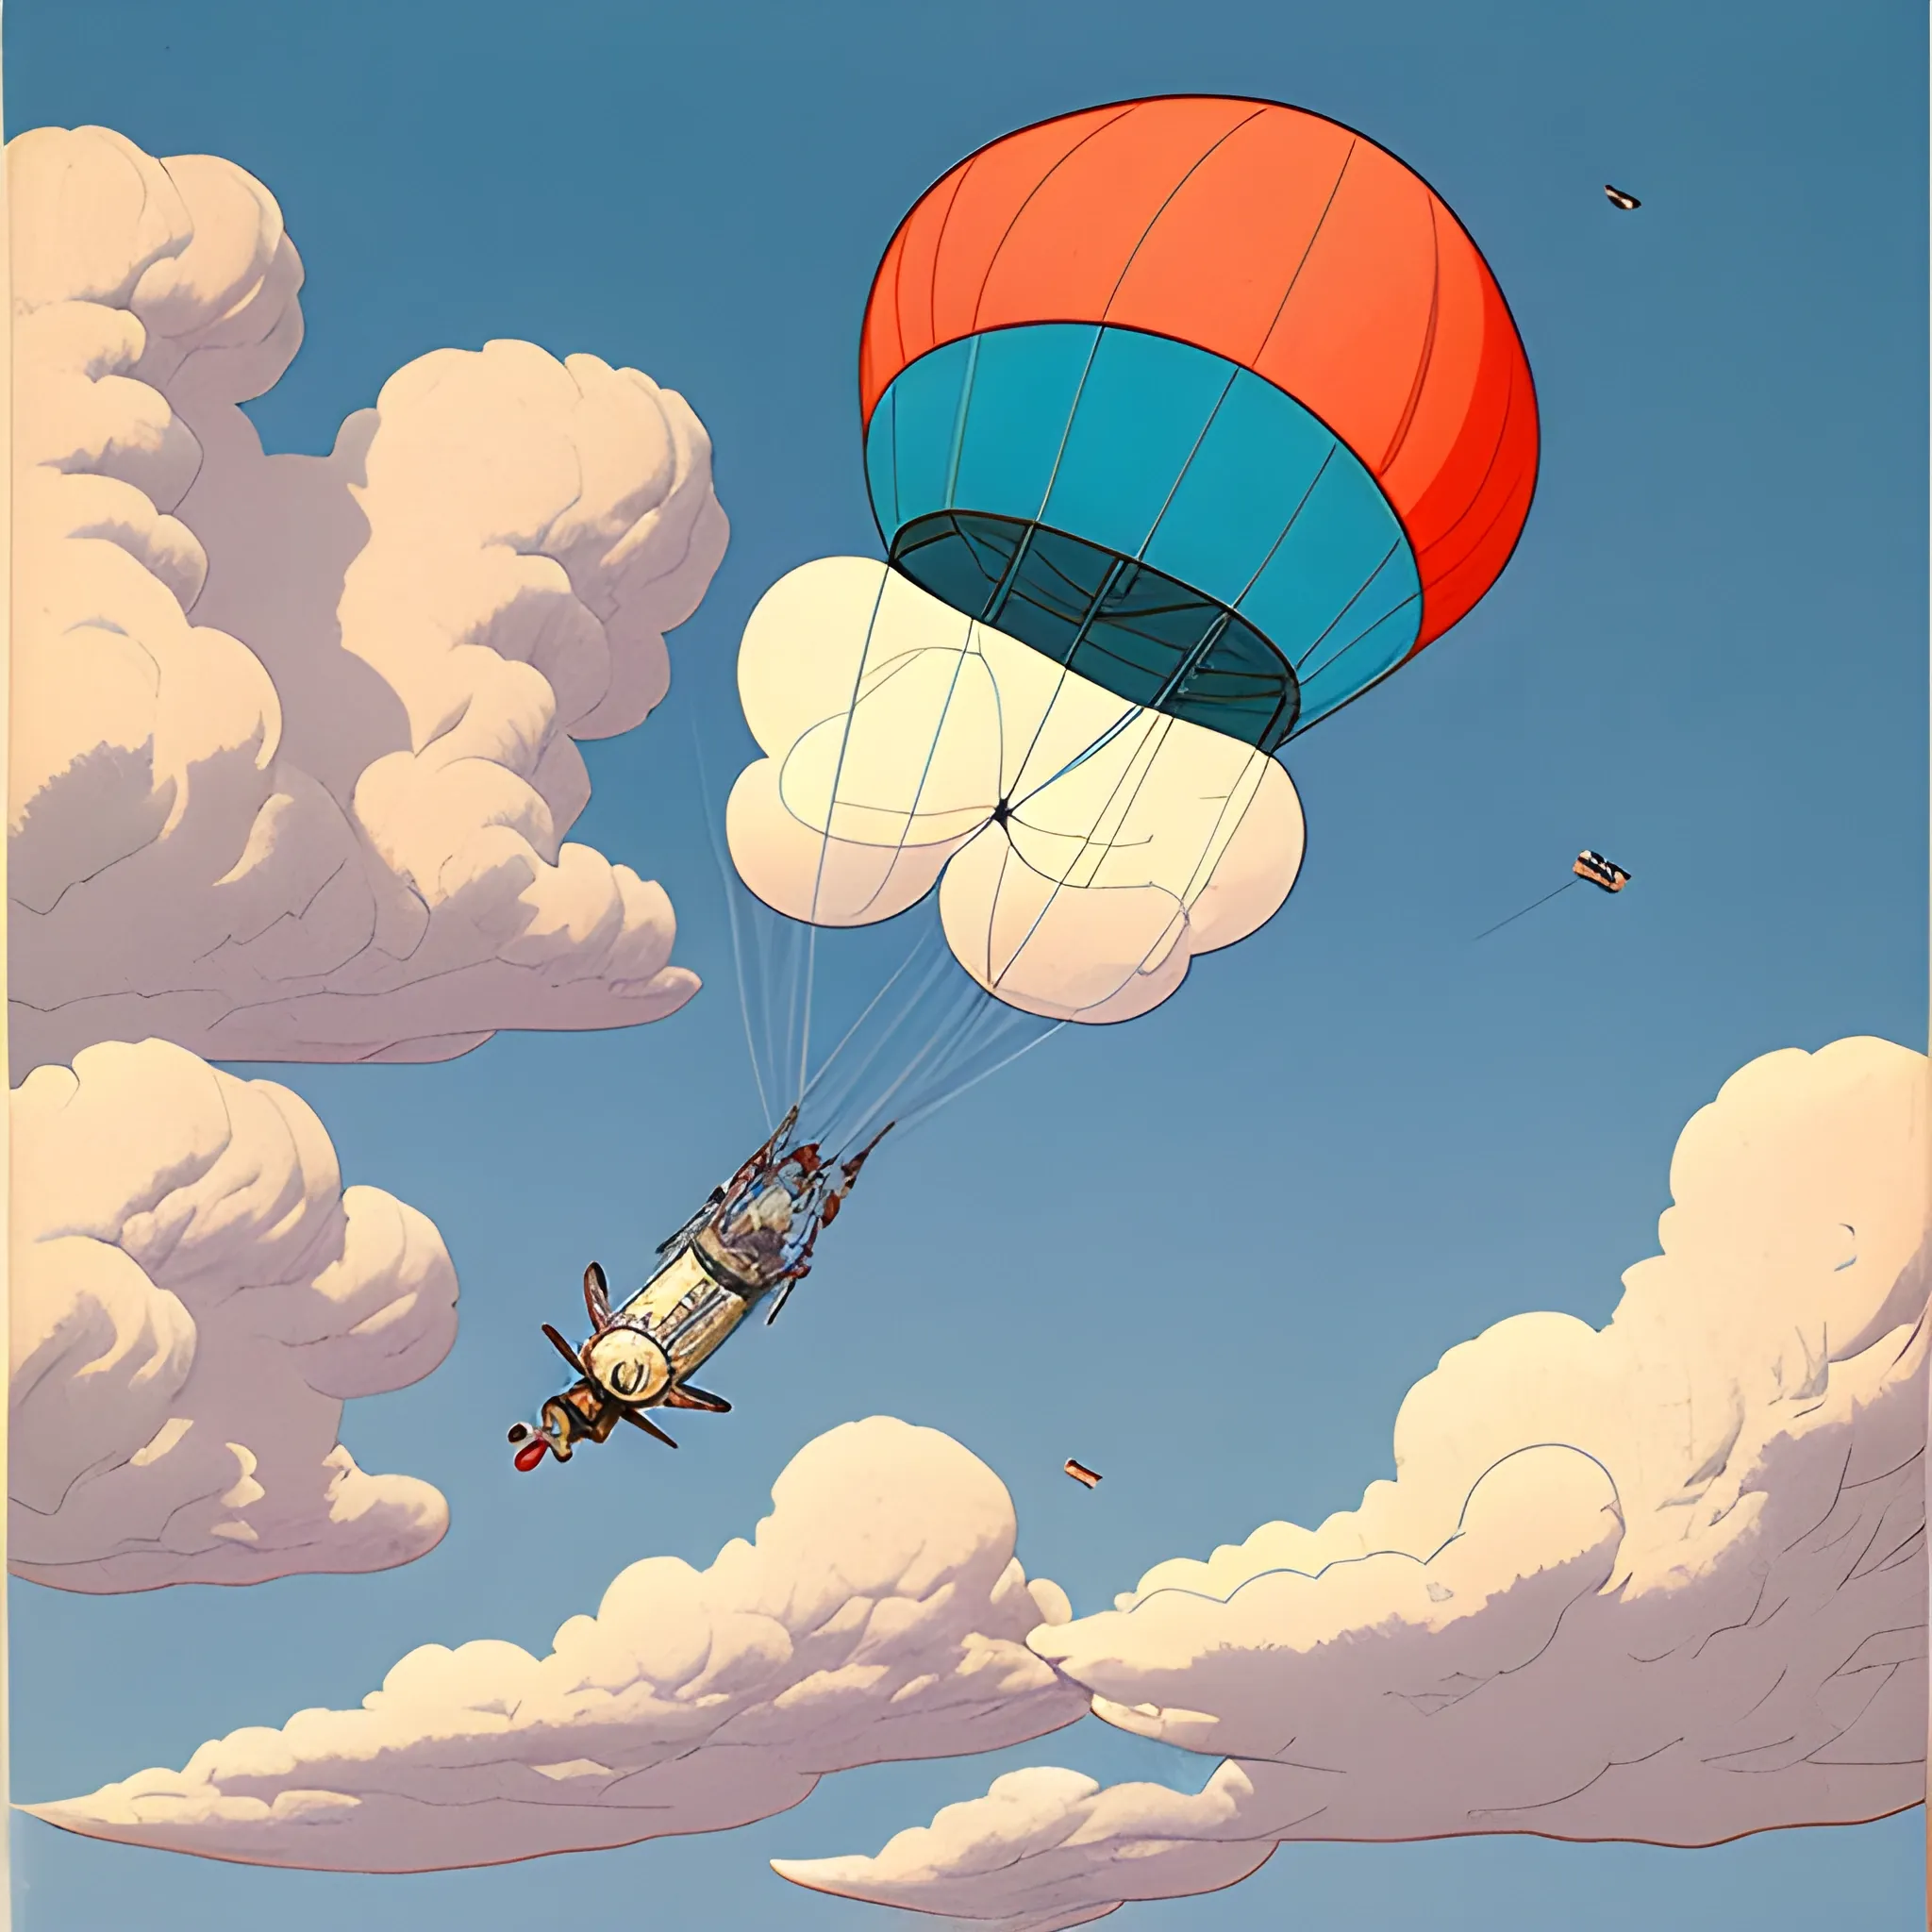 1960's military spy balloon with pilot, flying through the clouds, side view, drawn in Jean giraud's art style 